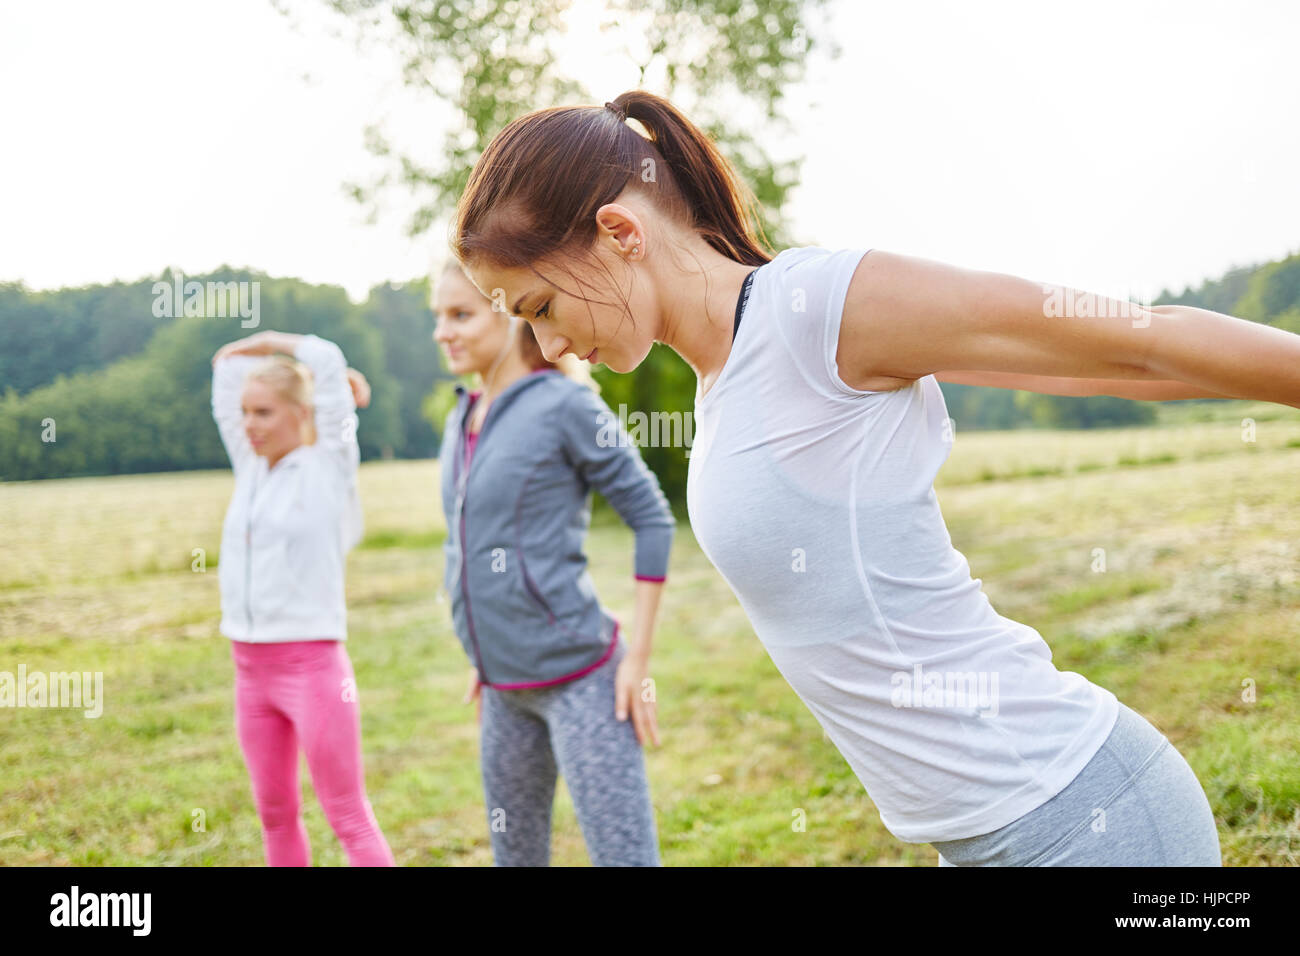 Women training as group at their fitness health class Stock Photo